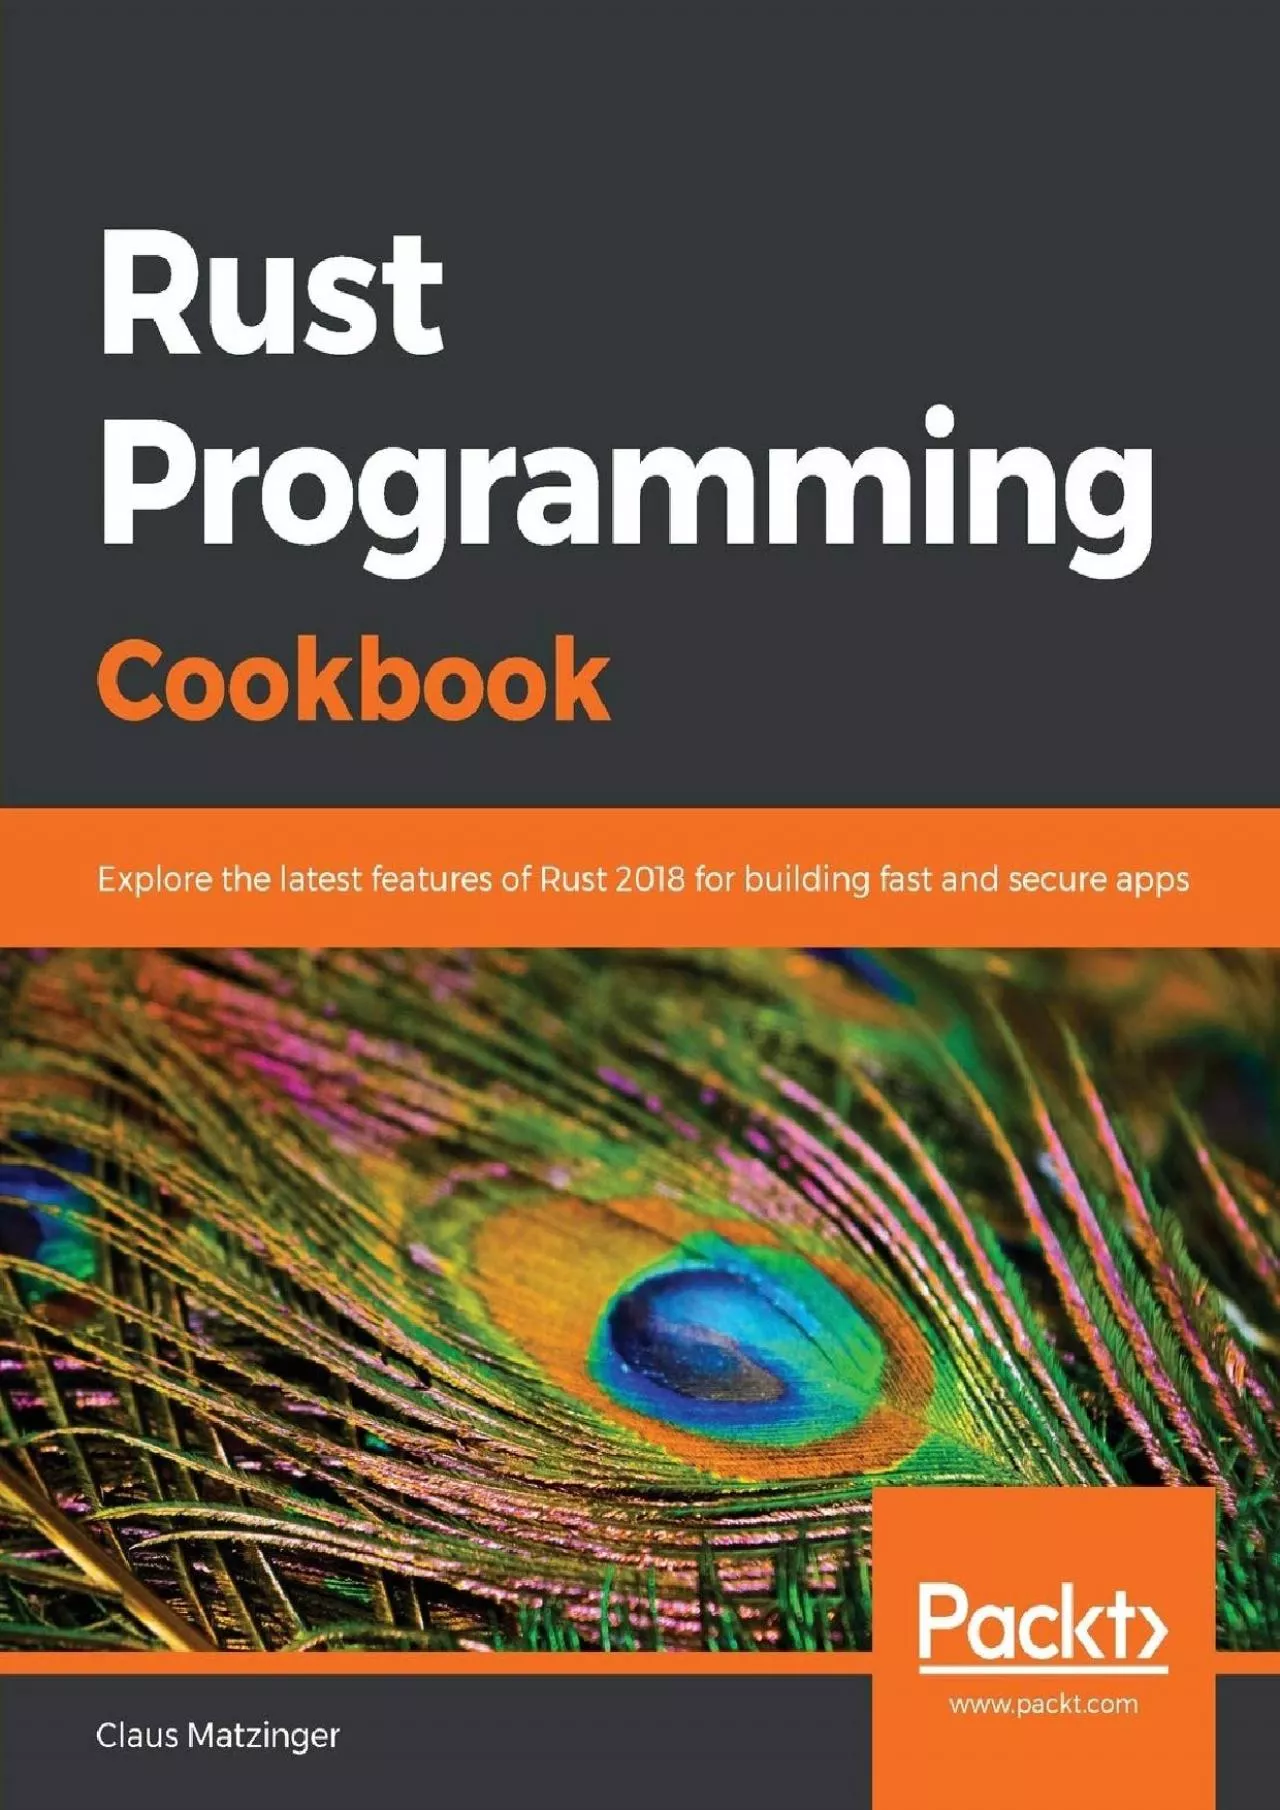 [READING BOOK]-Rust Programming Cookbook: Explore the latest features of Rust 2018 for